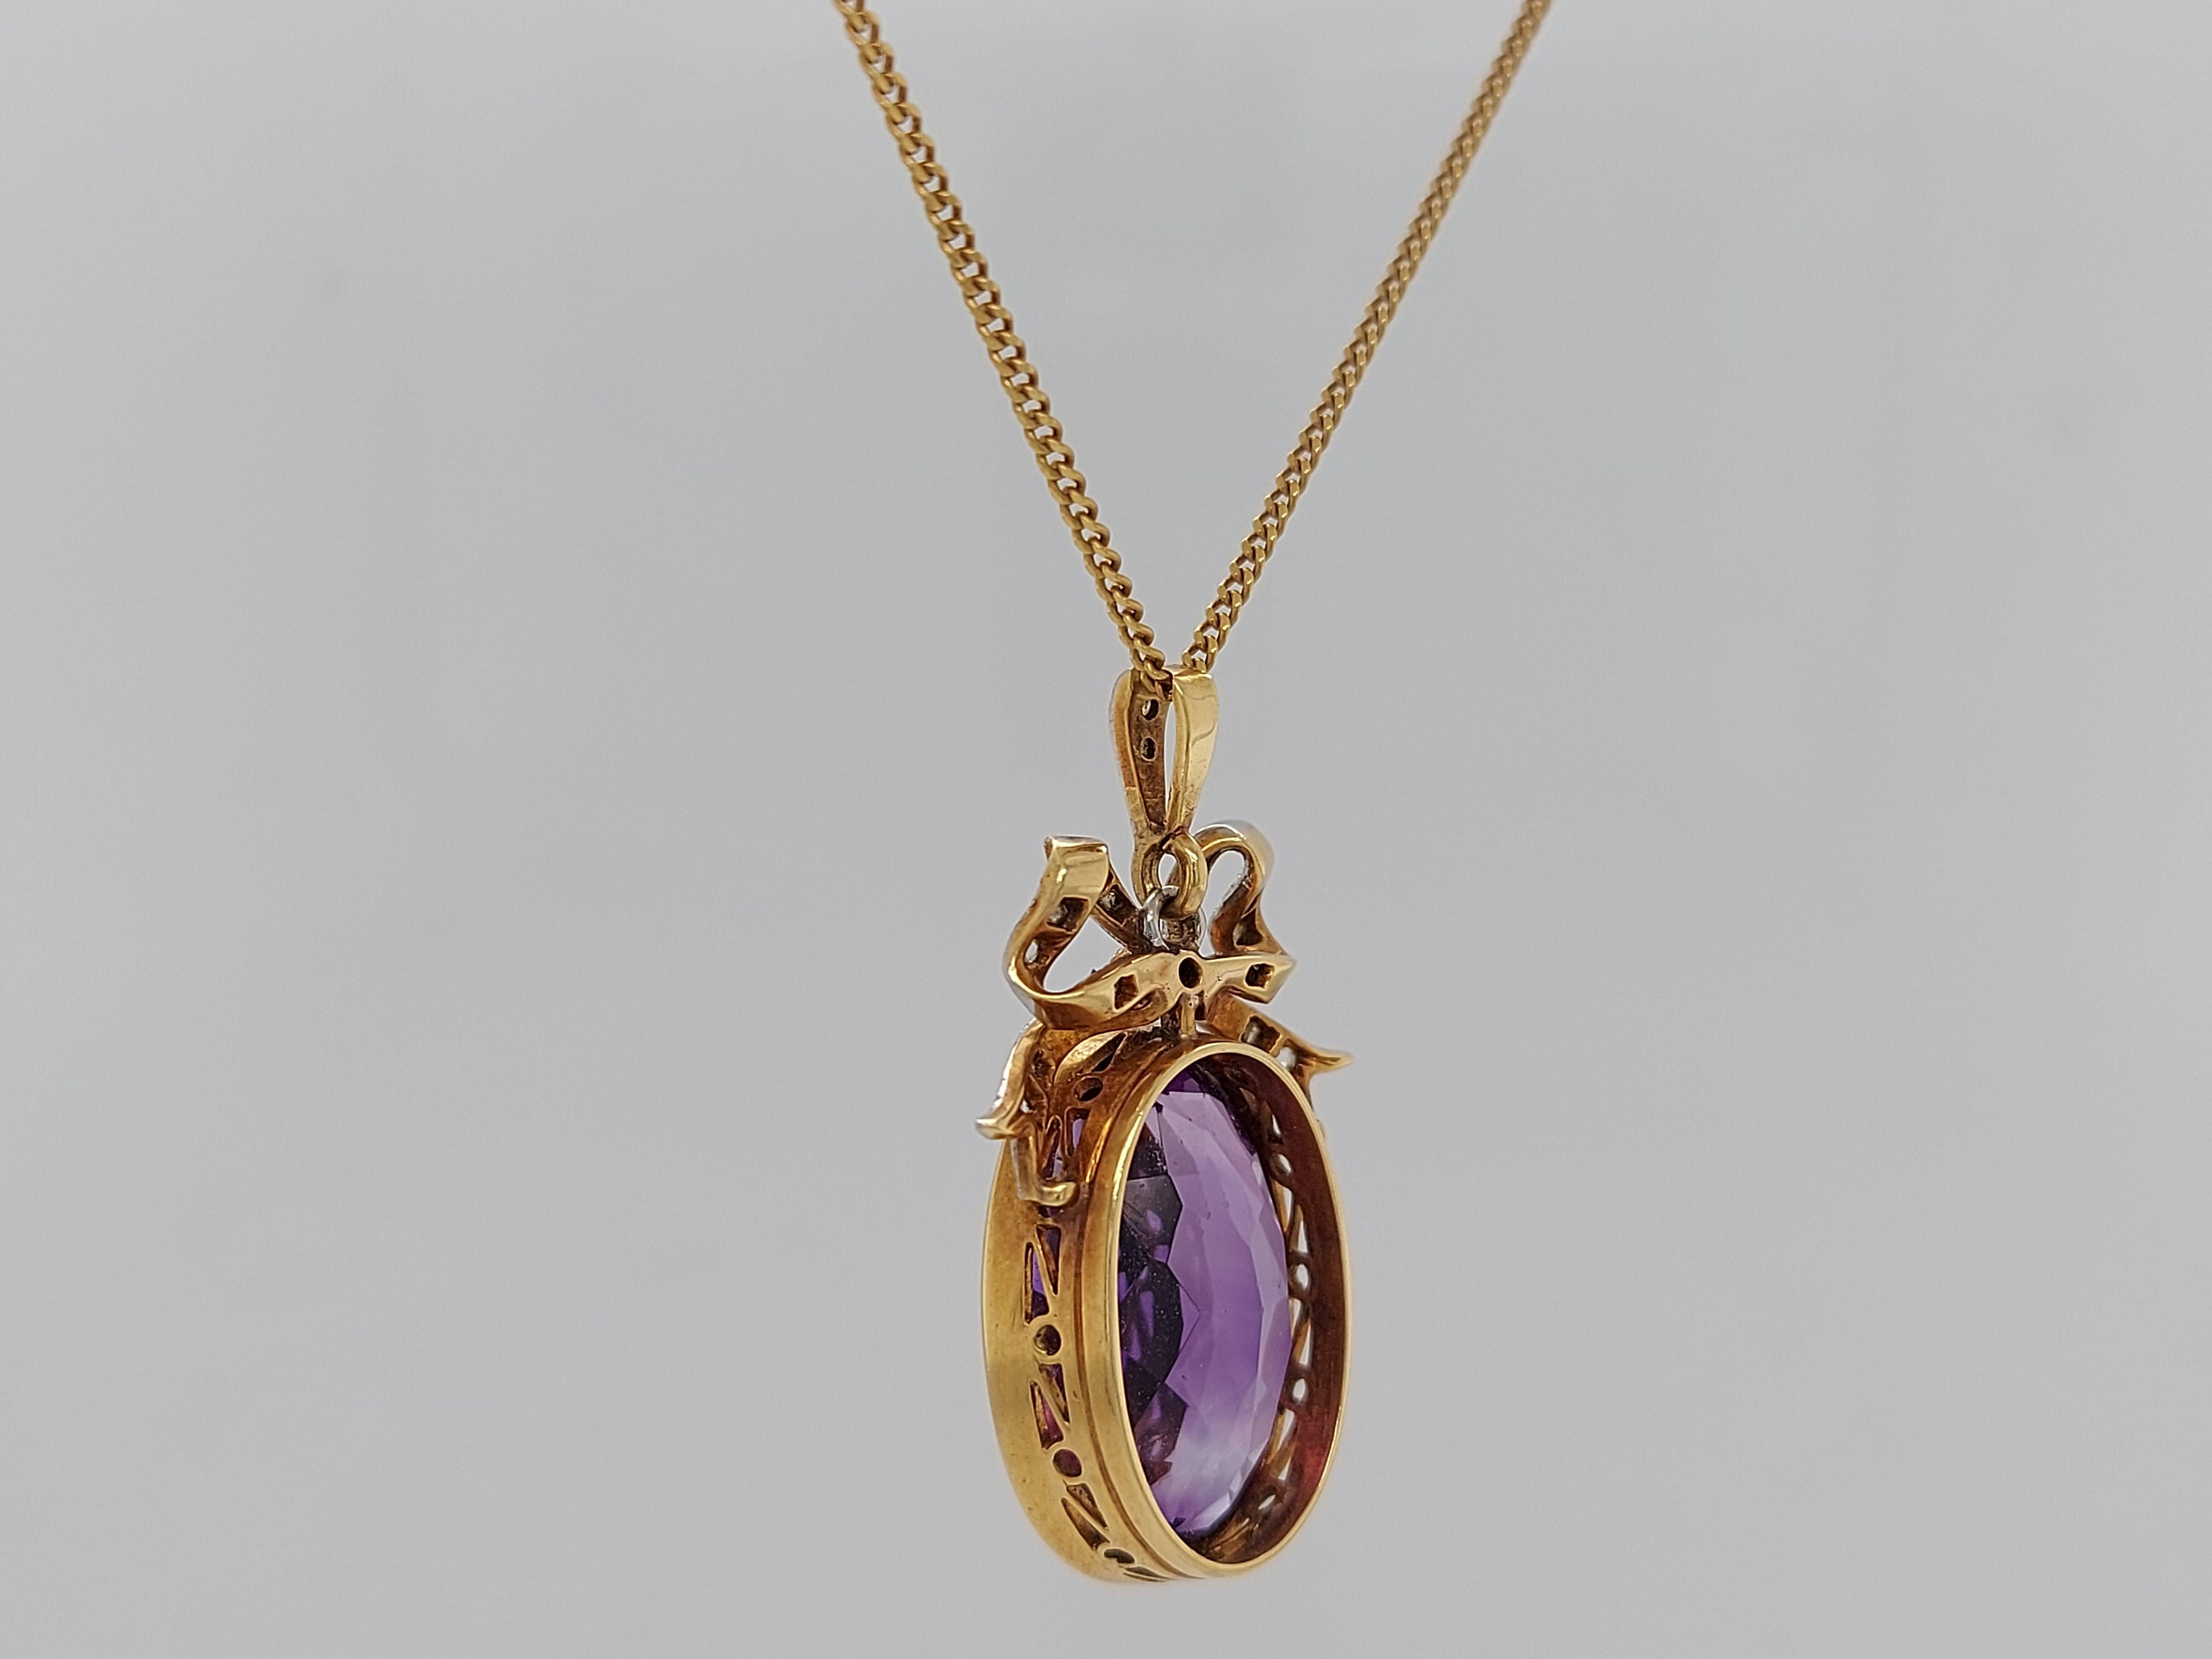 Vintage Yellow Gold Pendant Necklace with Amethyst and Rose Cut Diamonds For Sale 4